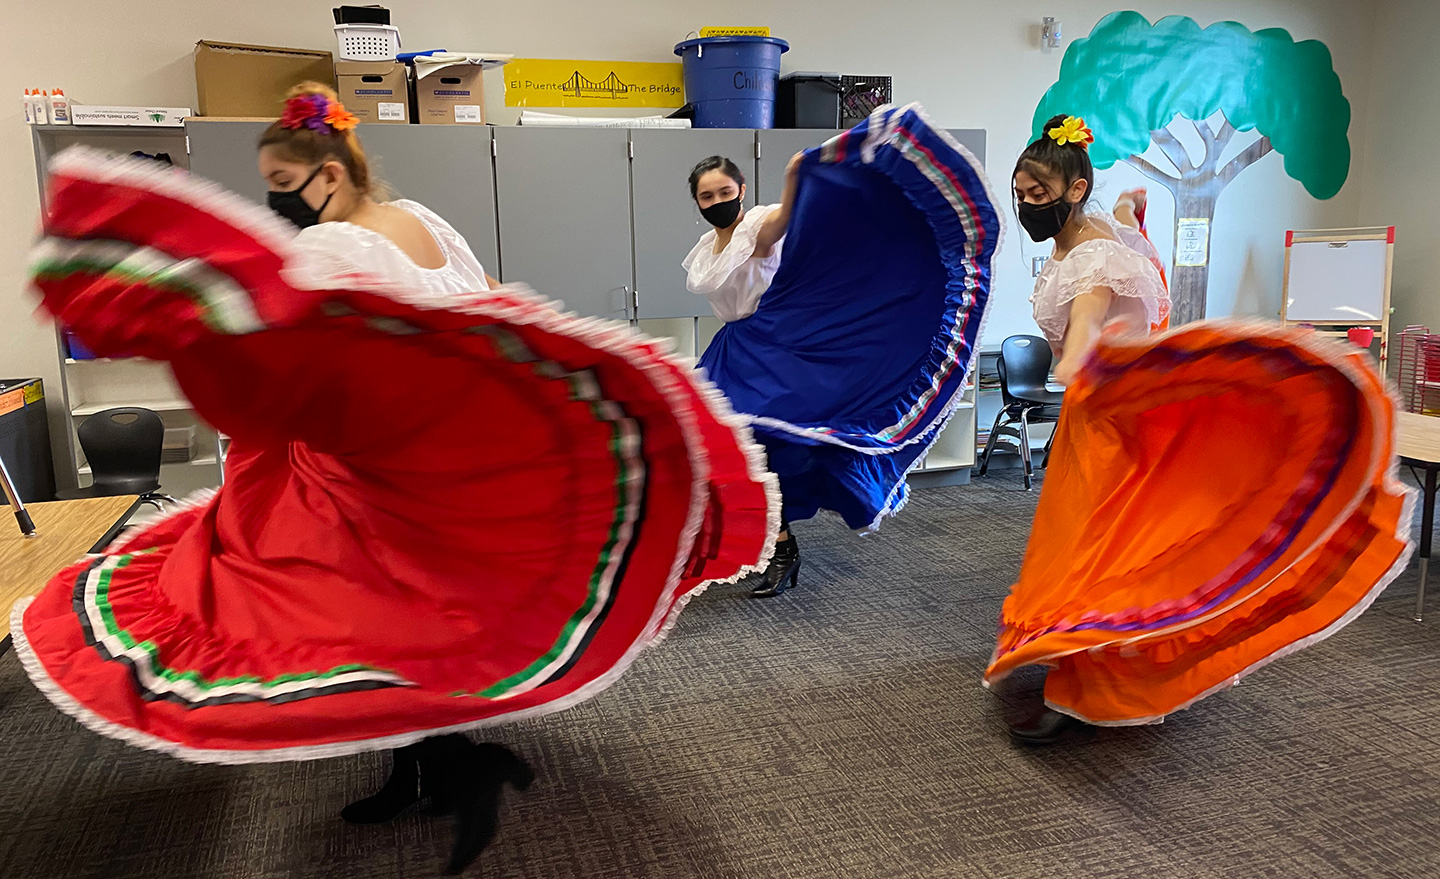 Dancers in traditional garb perform a Mexican folk dance.